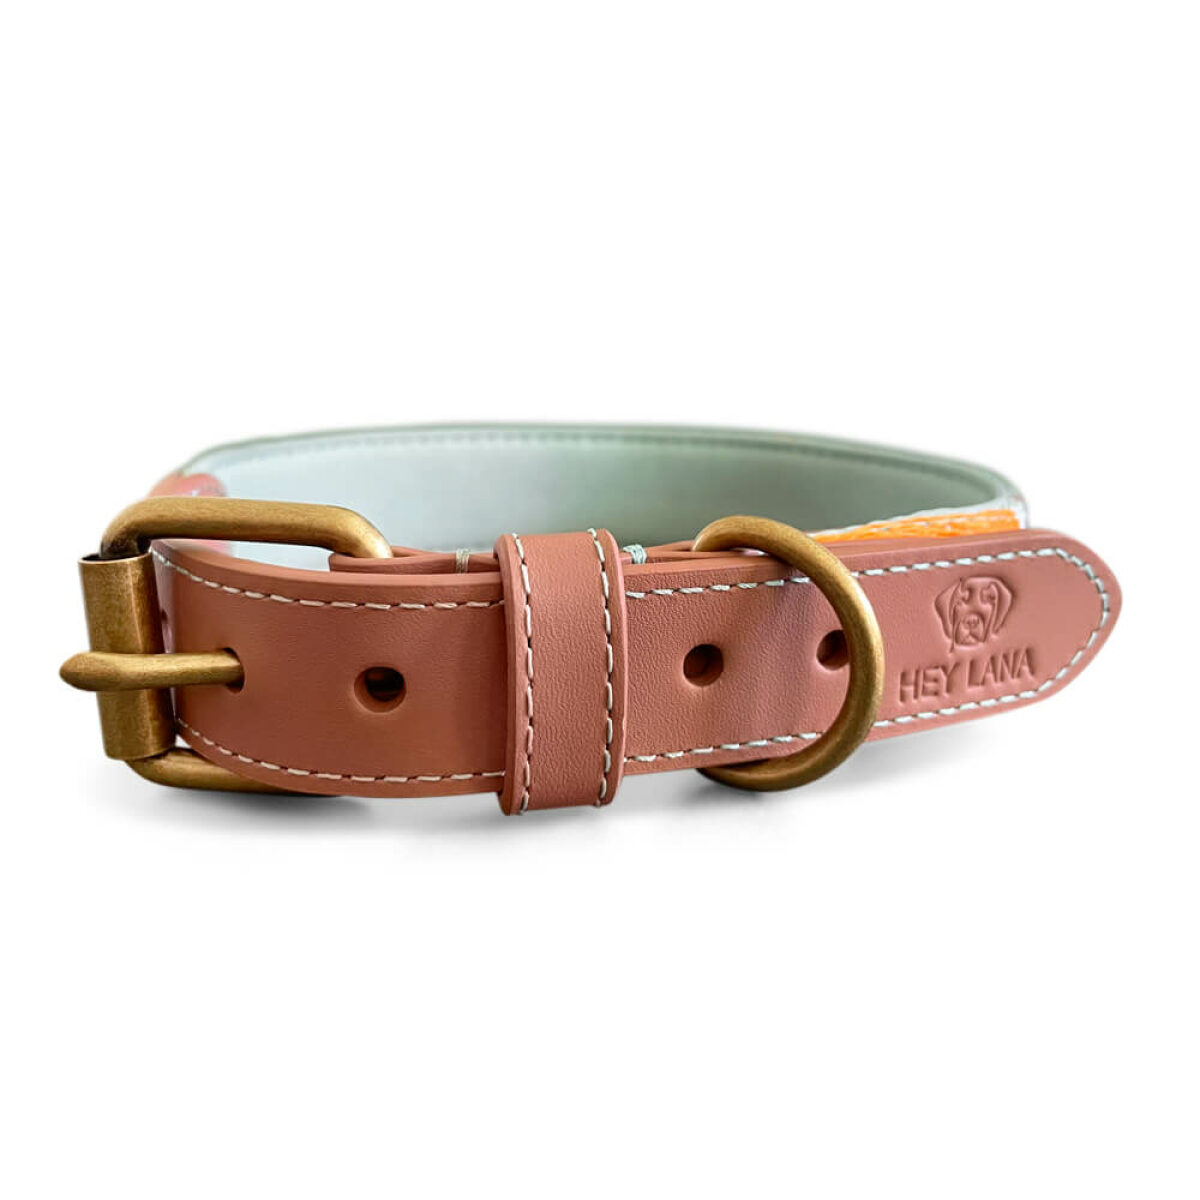 Premium padded dog collar in mint/orange at the front